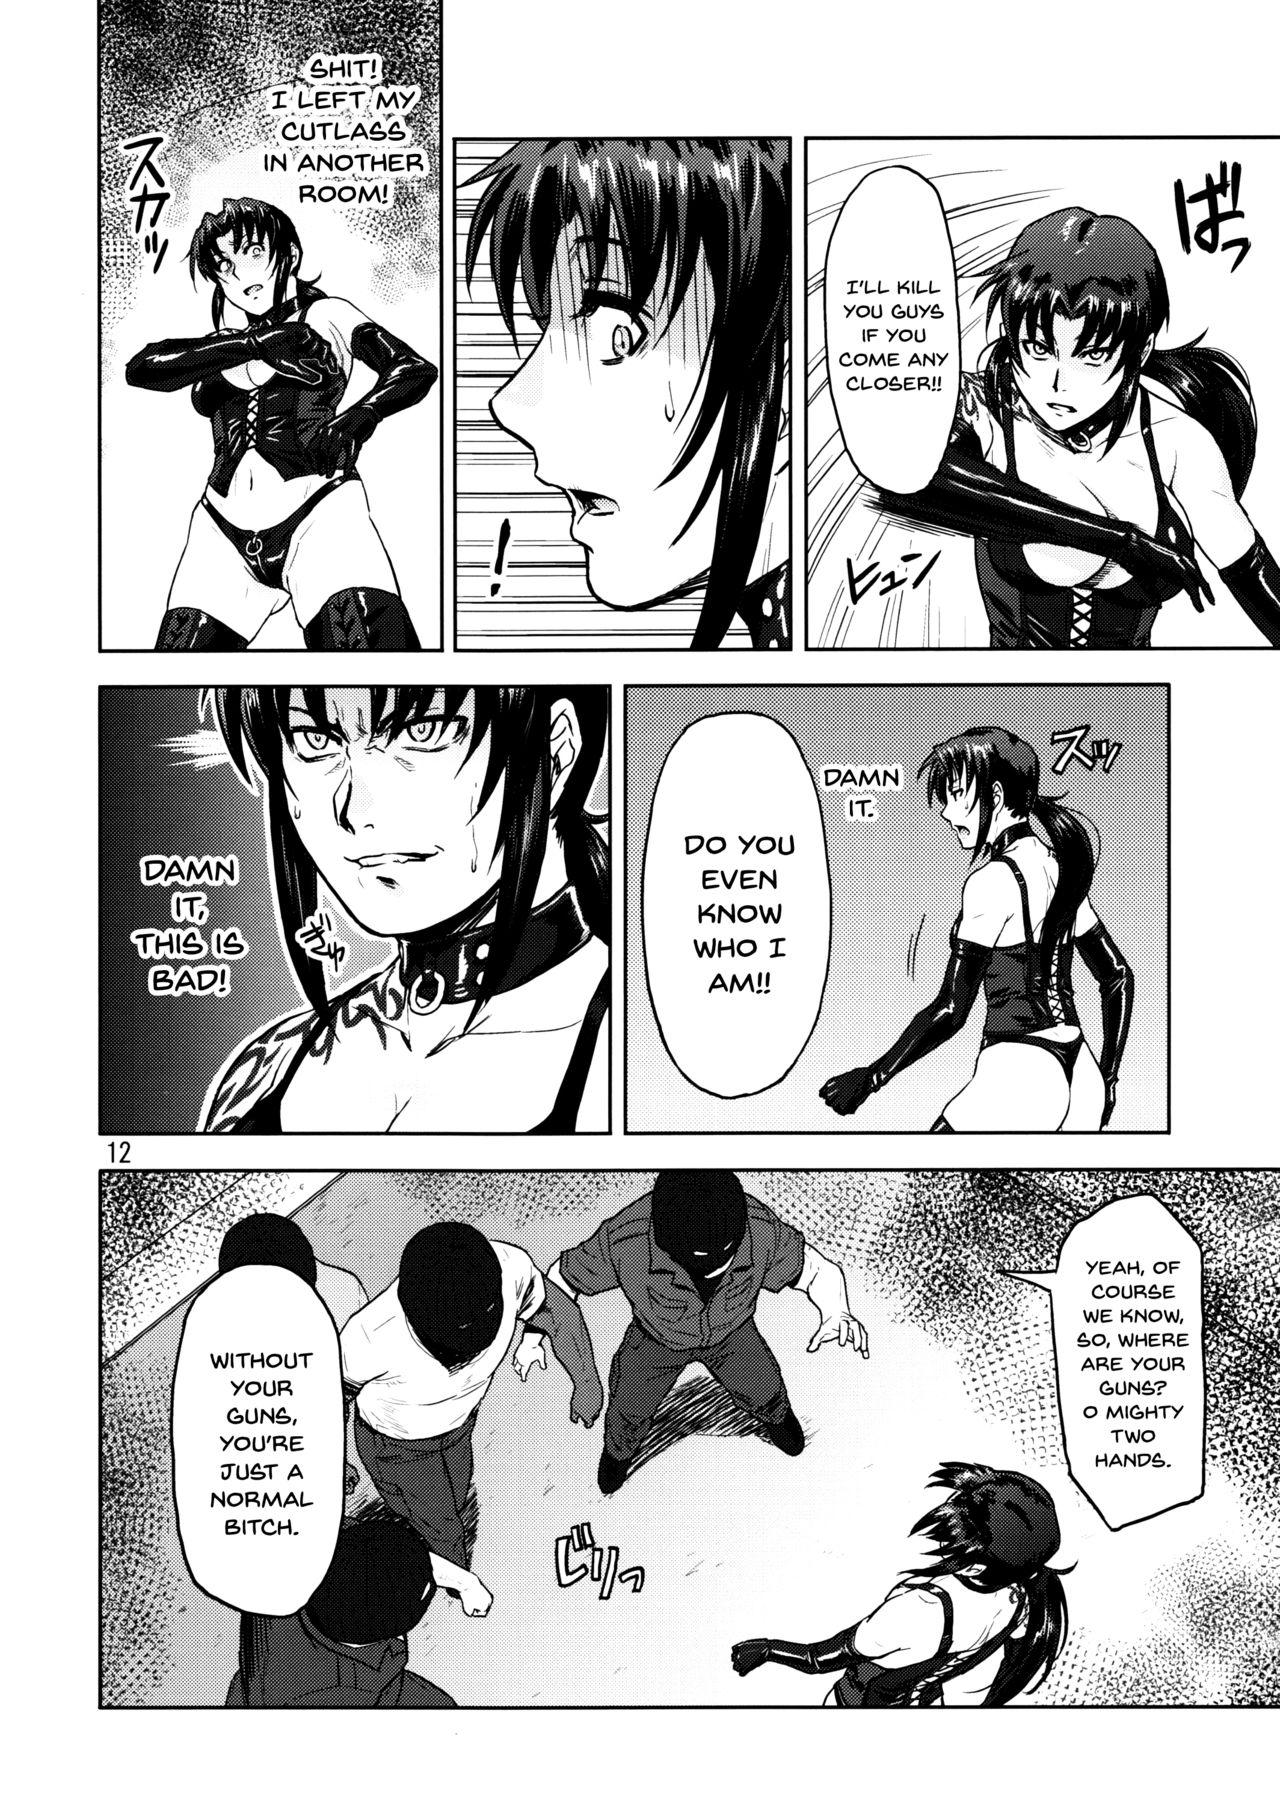 Phat Dressing Room - Black lagoon Consolo - Page 12